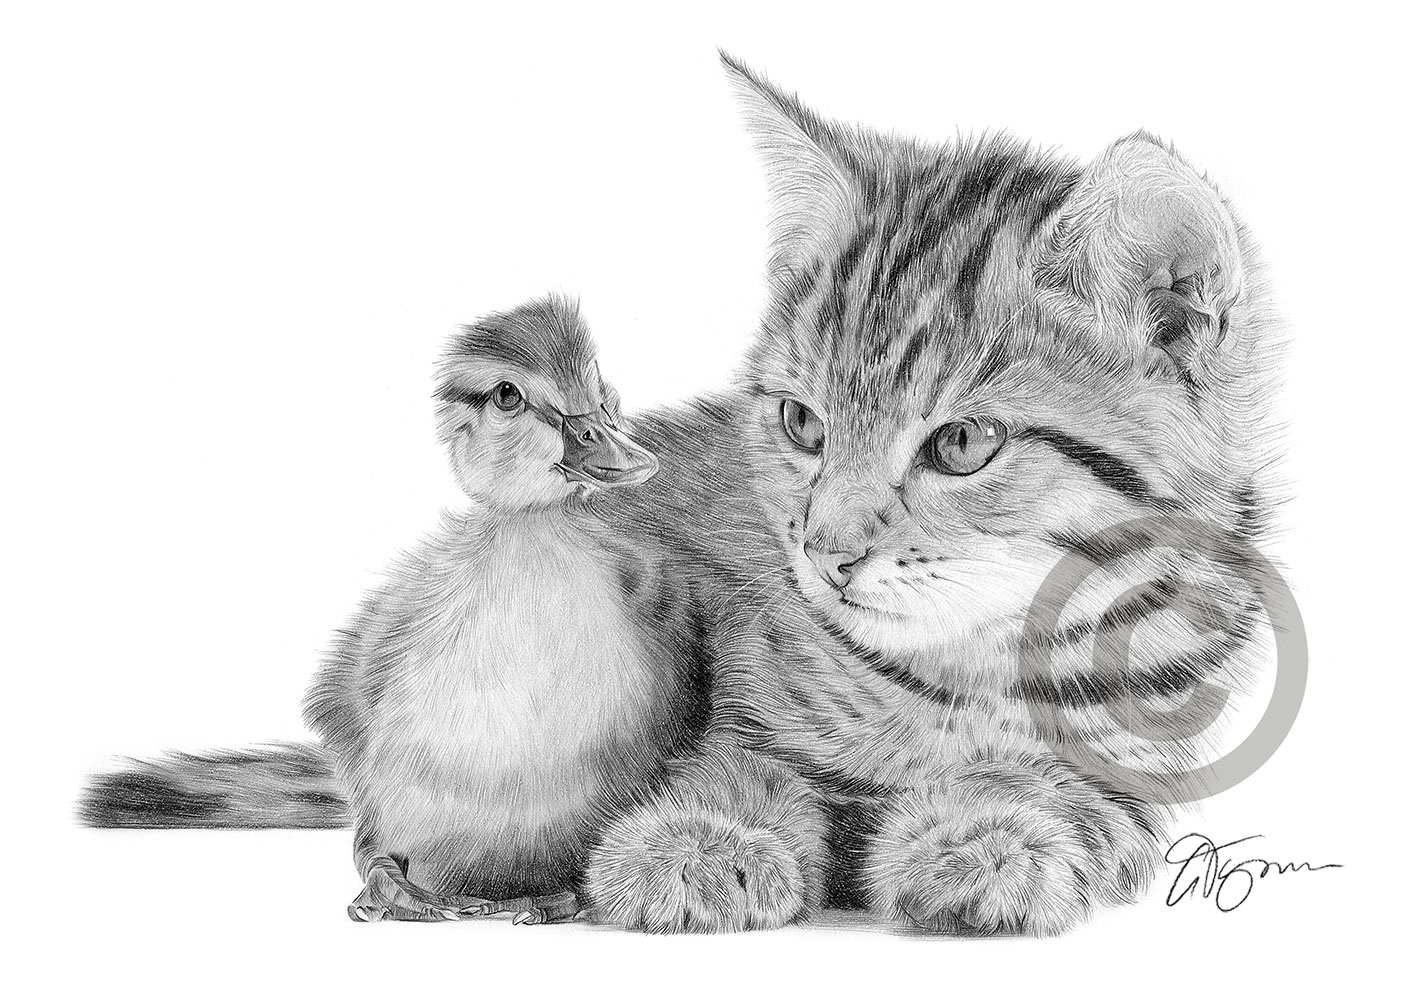 Cat And Duckling Pencil Drawing Print A4 Only Signed By Artist Gary